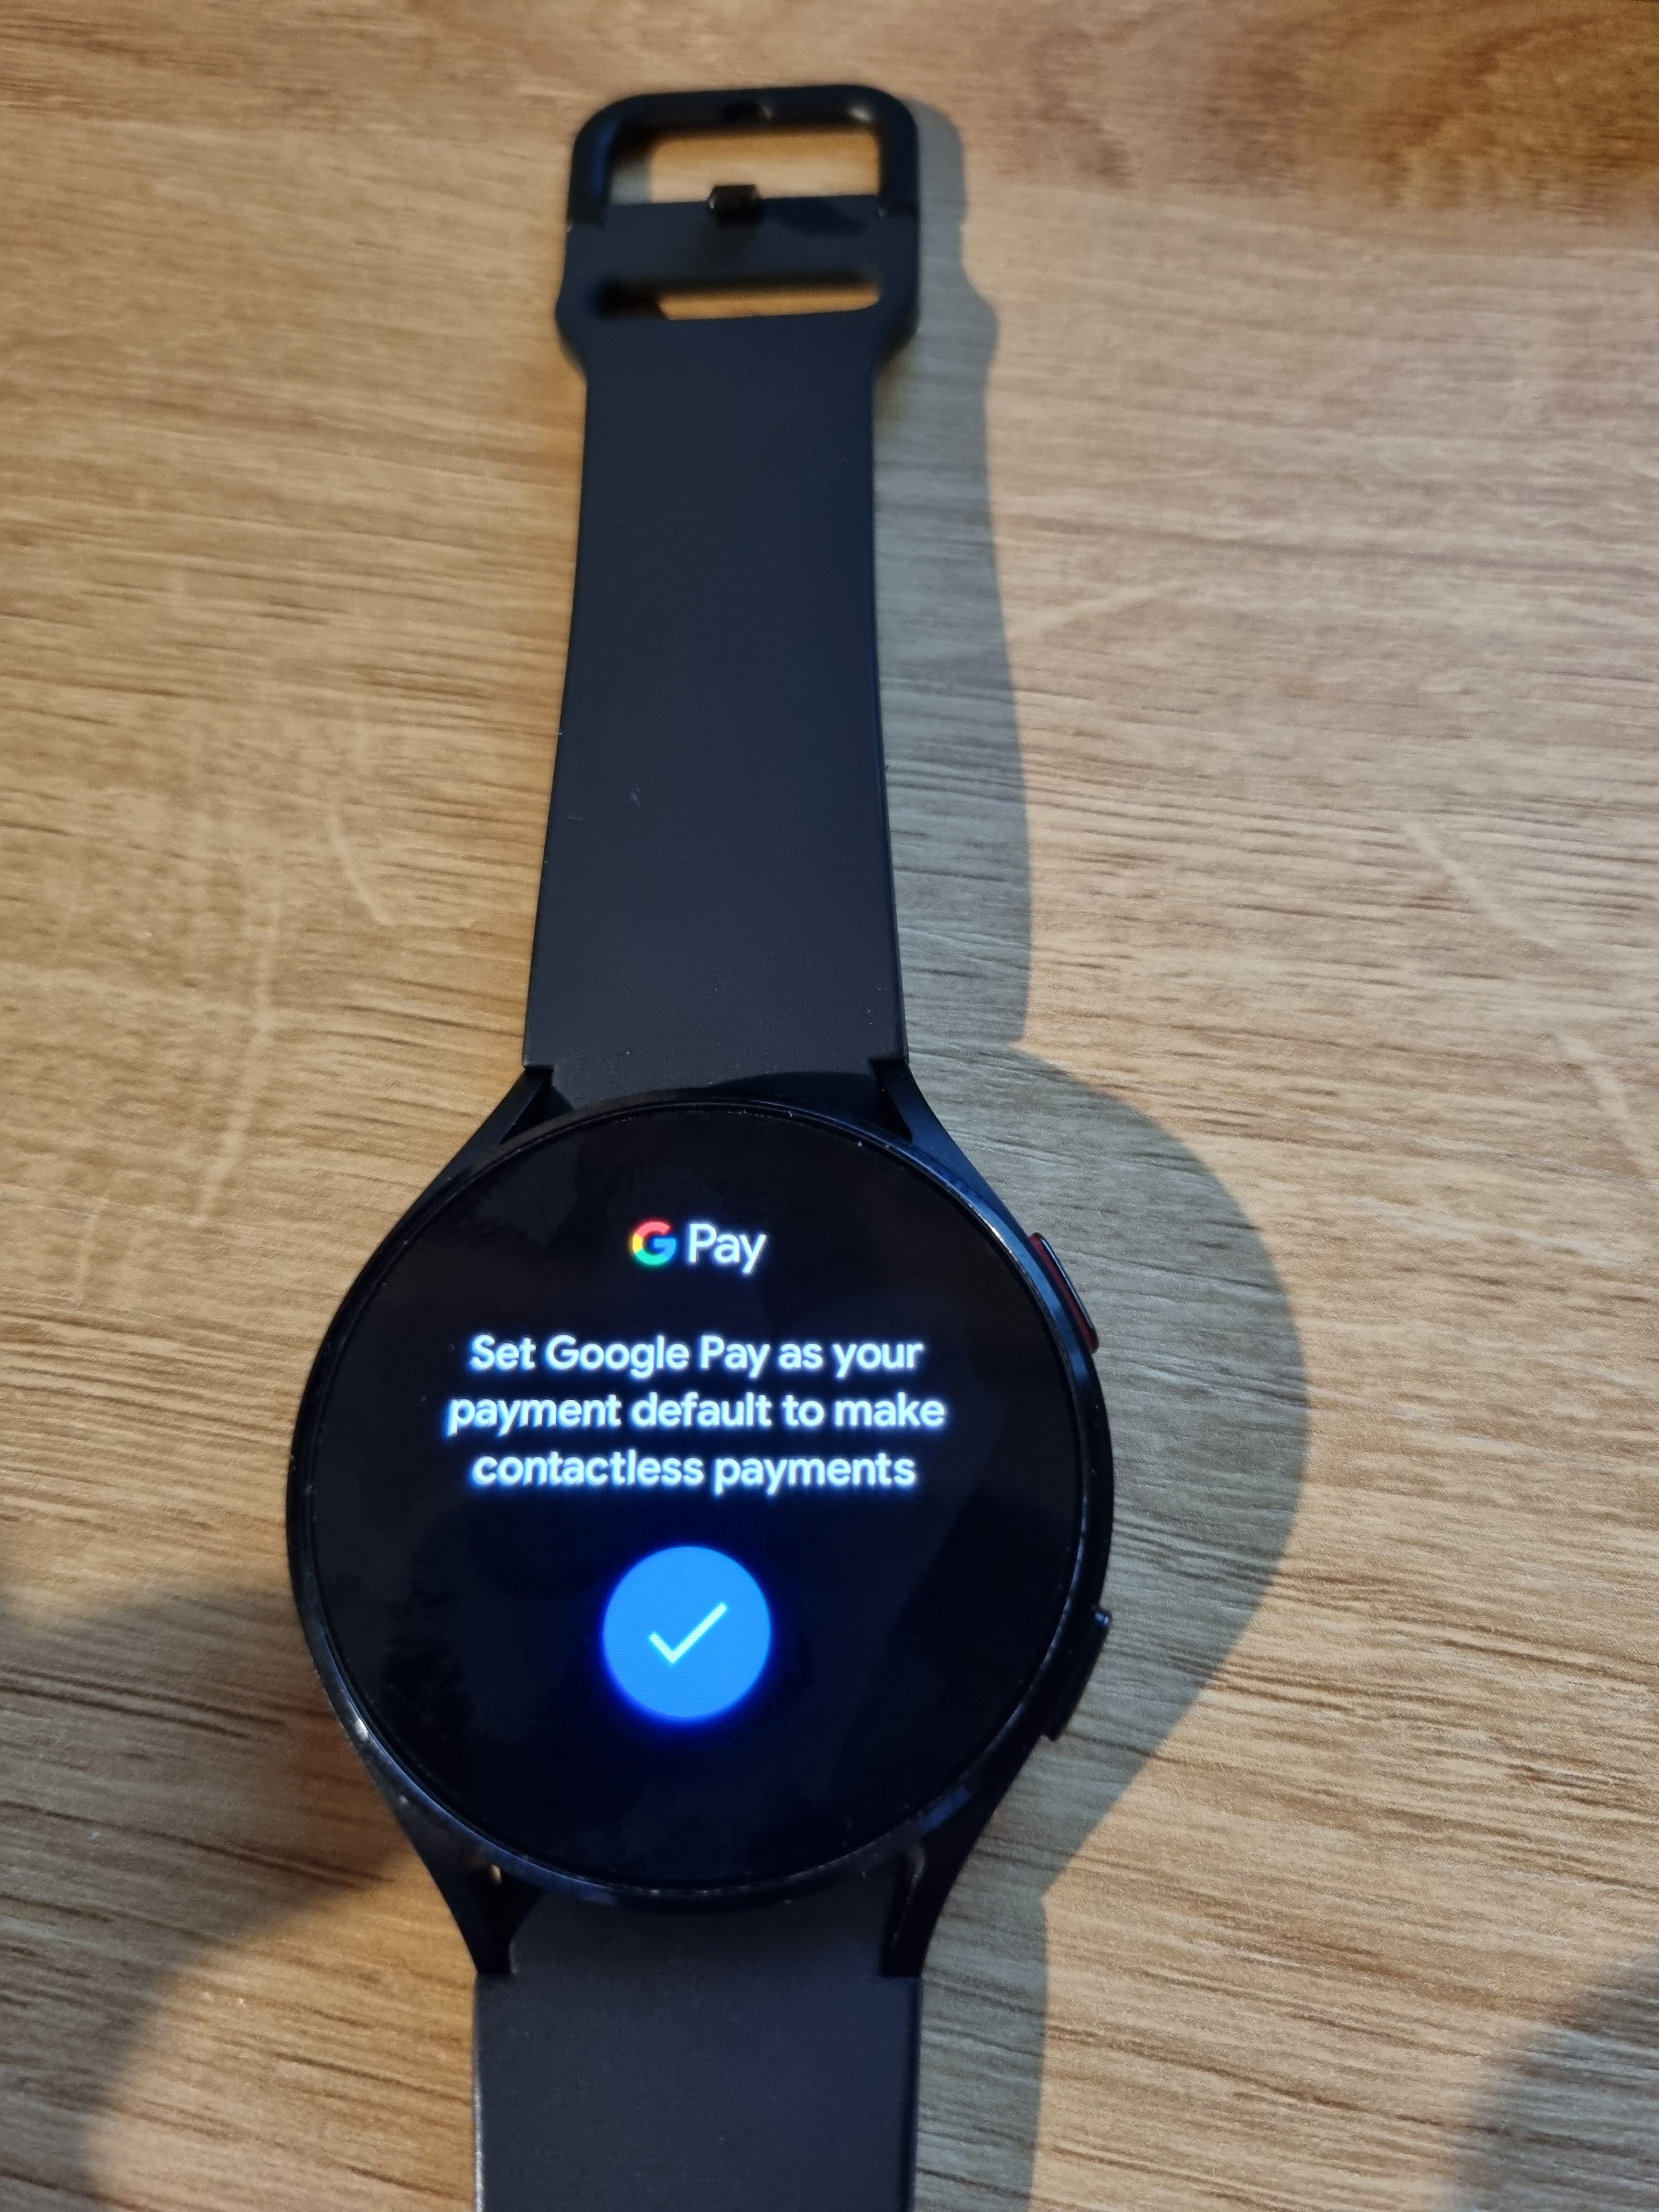 Google Pay on galaxy watch 4 not working - Page 4 - Samsung Community